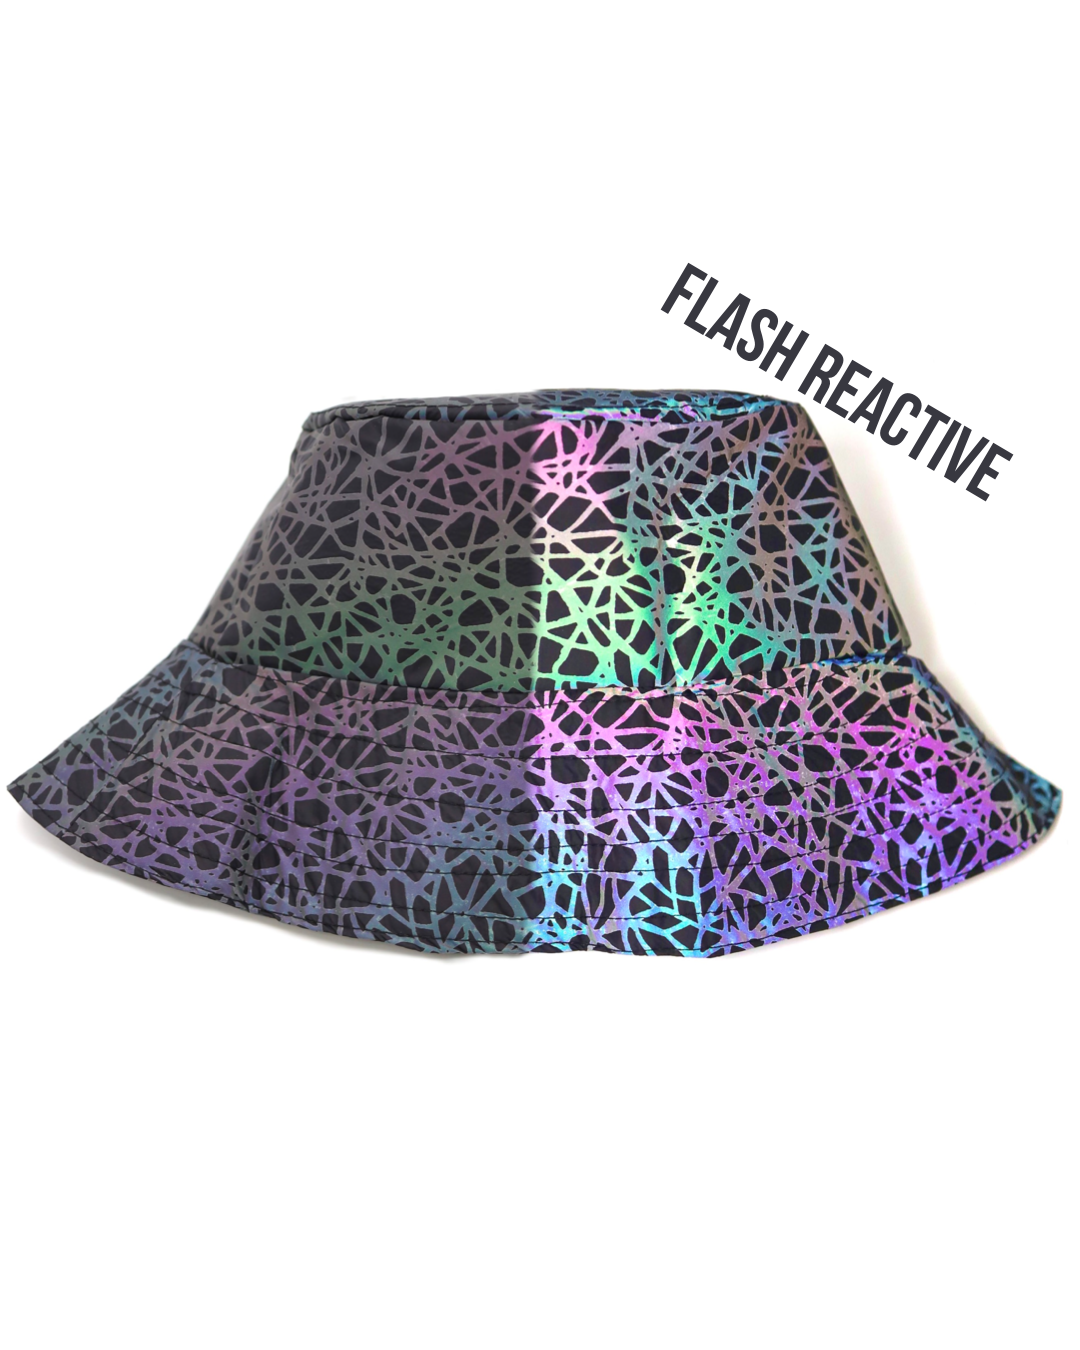 String Theory Reflective Bucket Hat, Bucket Hat, - One Stop Rave